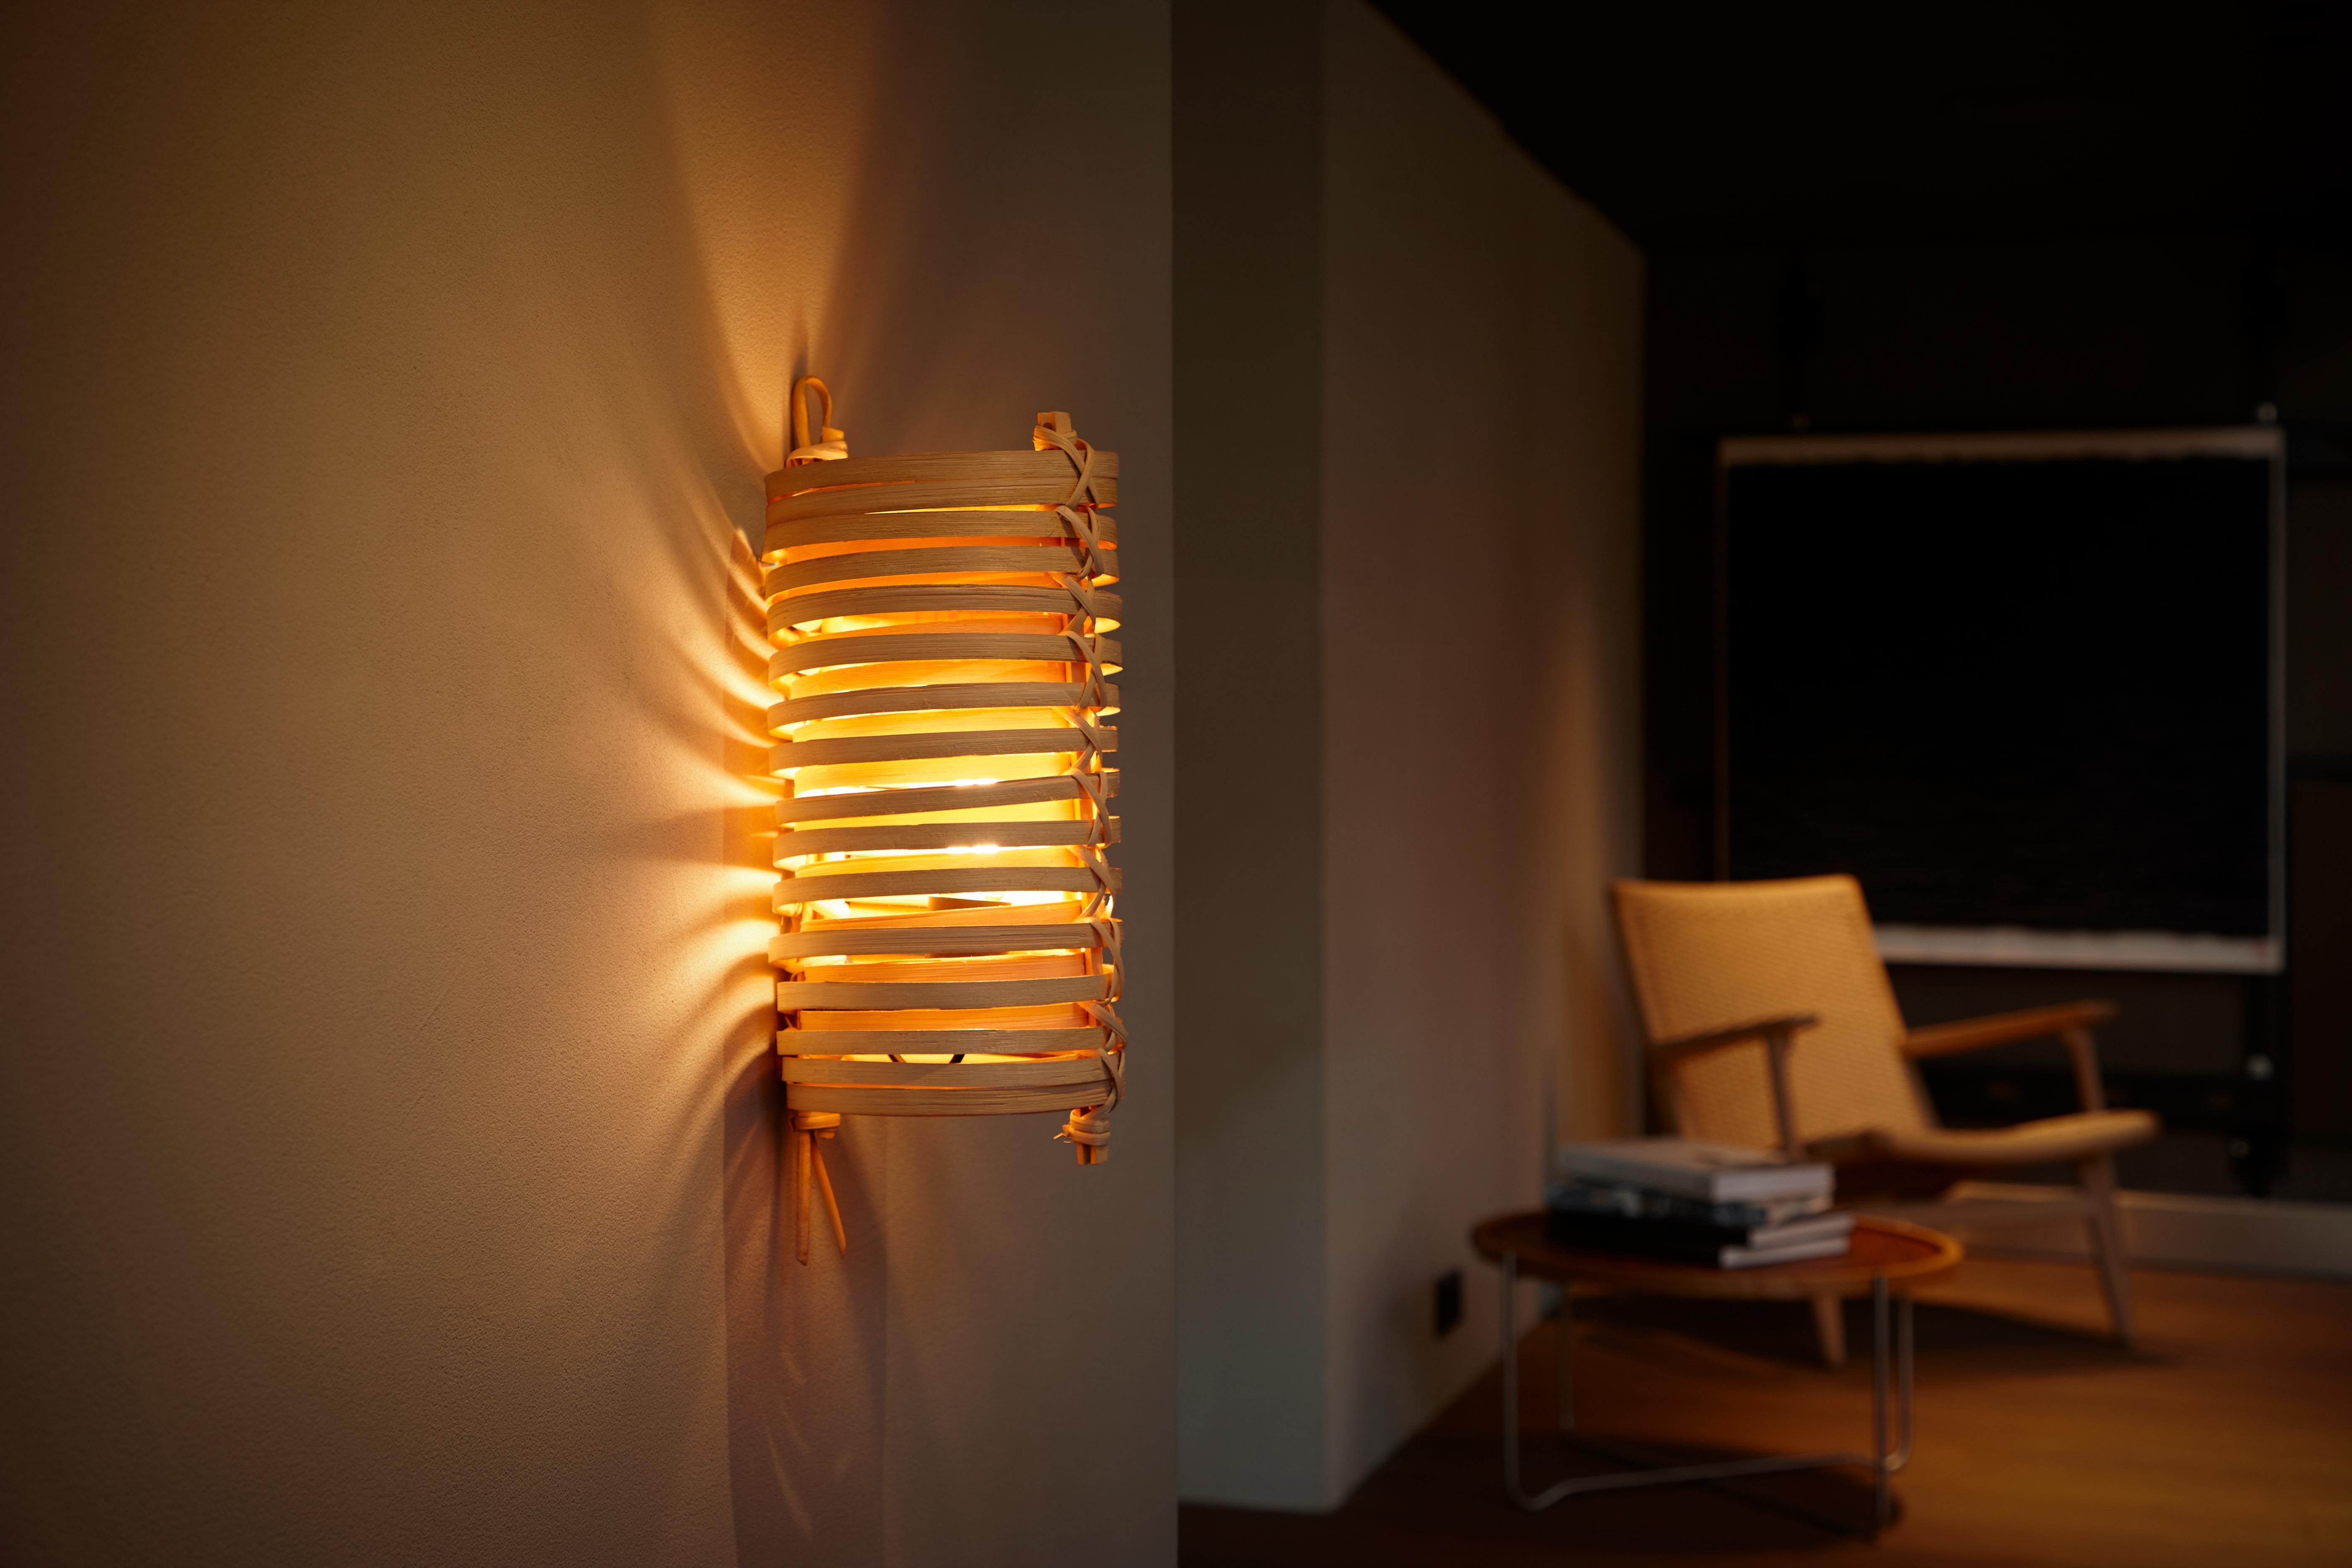 J.A. Coderch 'Junco' rattan cane wall lamp for Tunds. 

Pablo Picasso declared one of J.A. Coderch's bentwood designs to be 